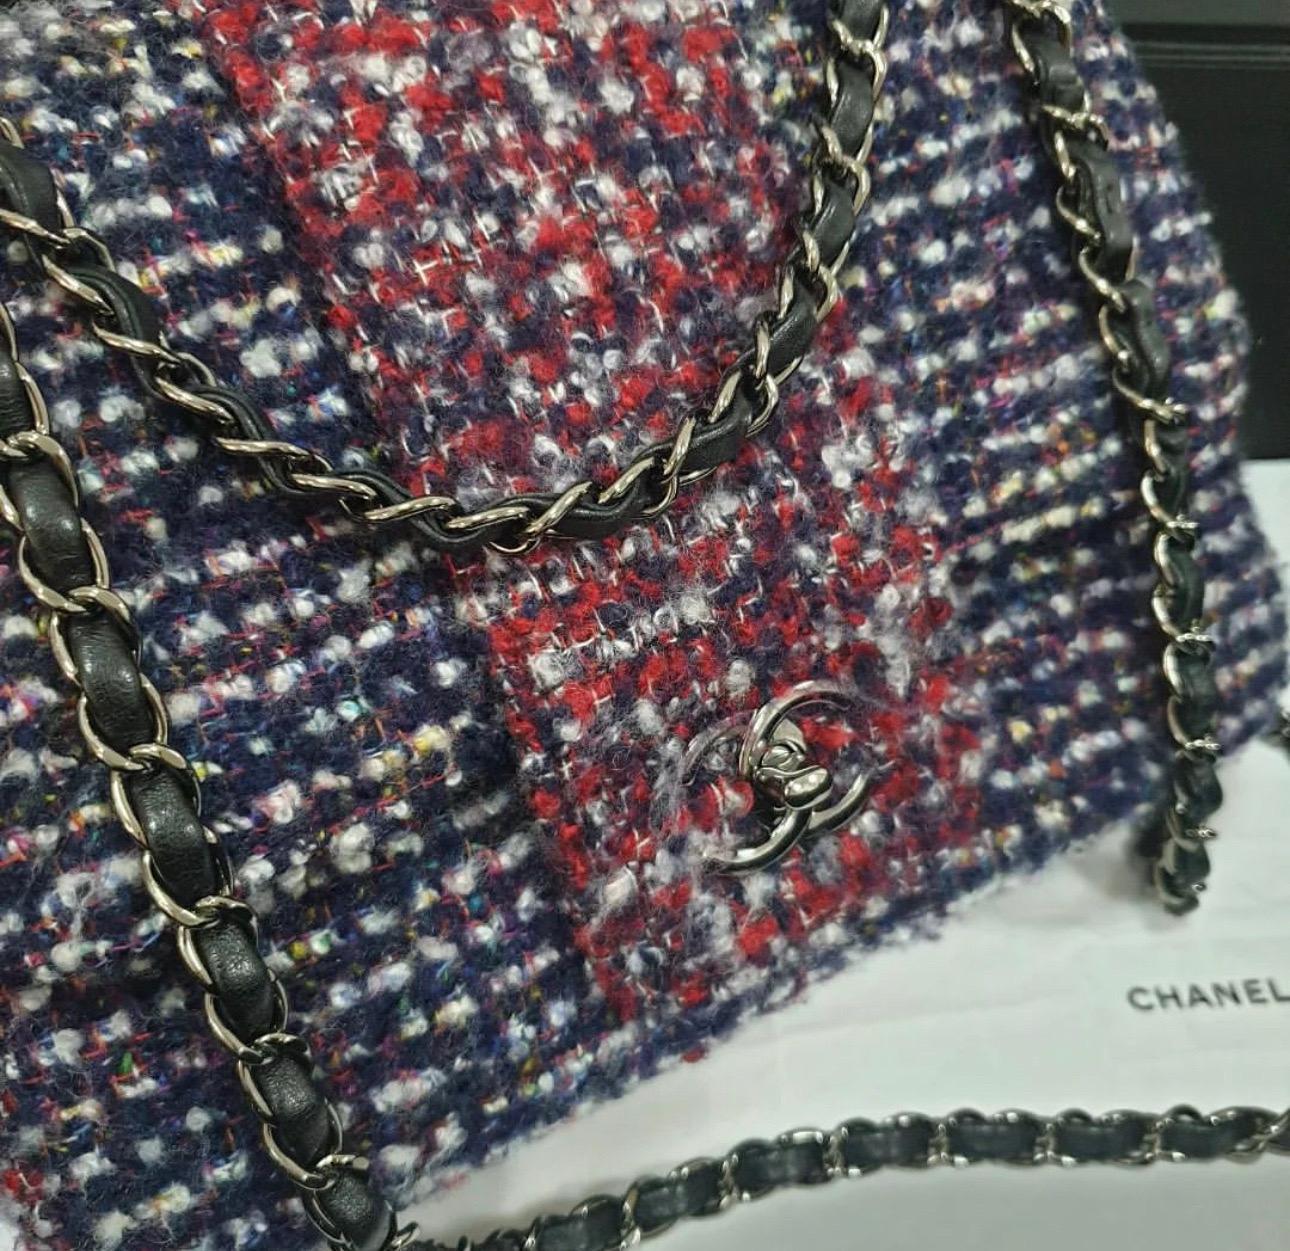 Chanel Pre-Fall 2015 Tweed Elementary Chic Flap Bag in burgundy, midnight blue and light grey Bouclé Tweed fabric featuring gunmetal hardware and an open pocket at the back.
 Opens with a classic CC turn-lock and is lined in black calfskin with one